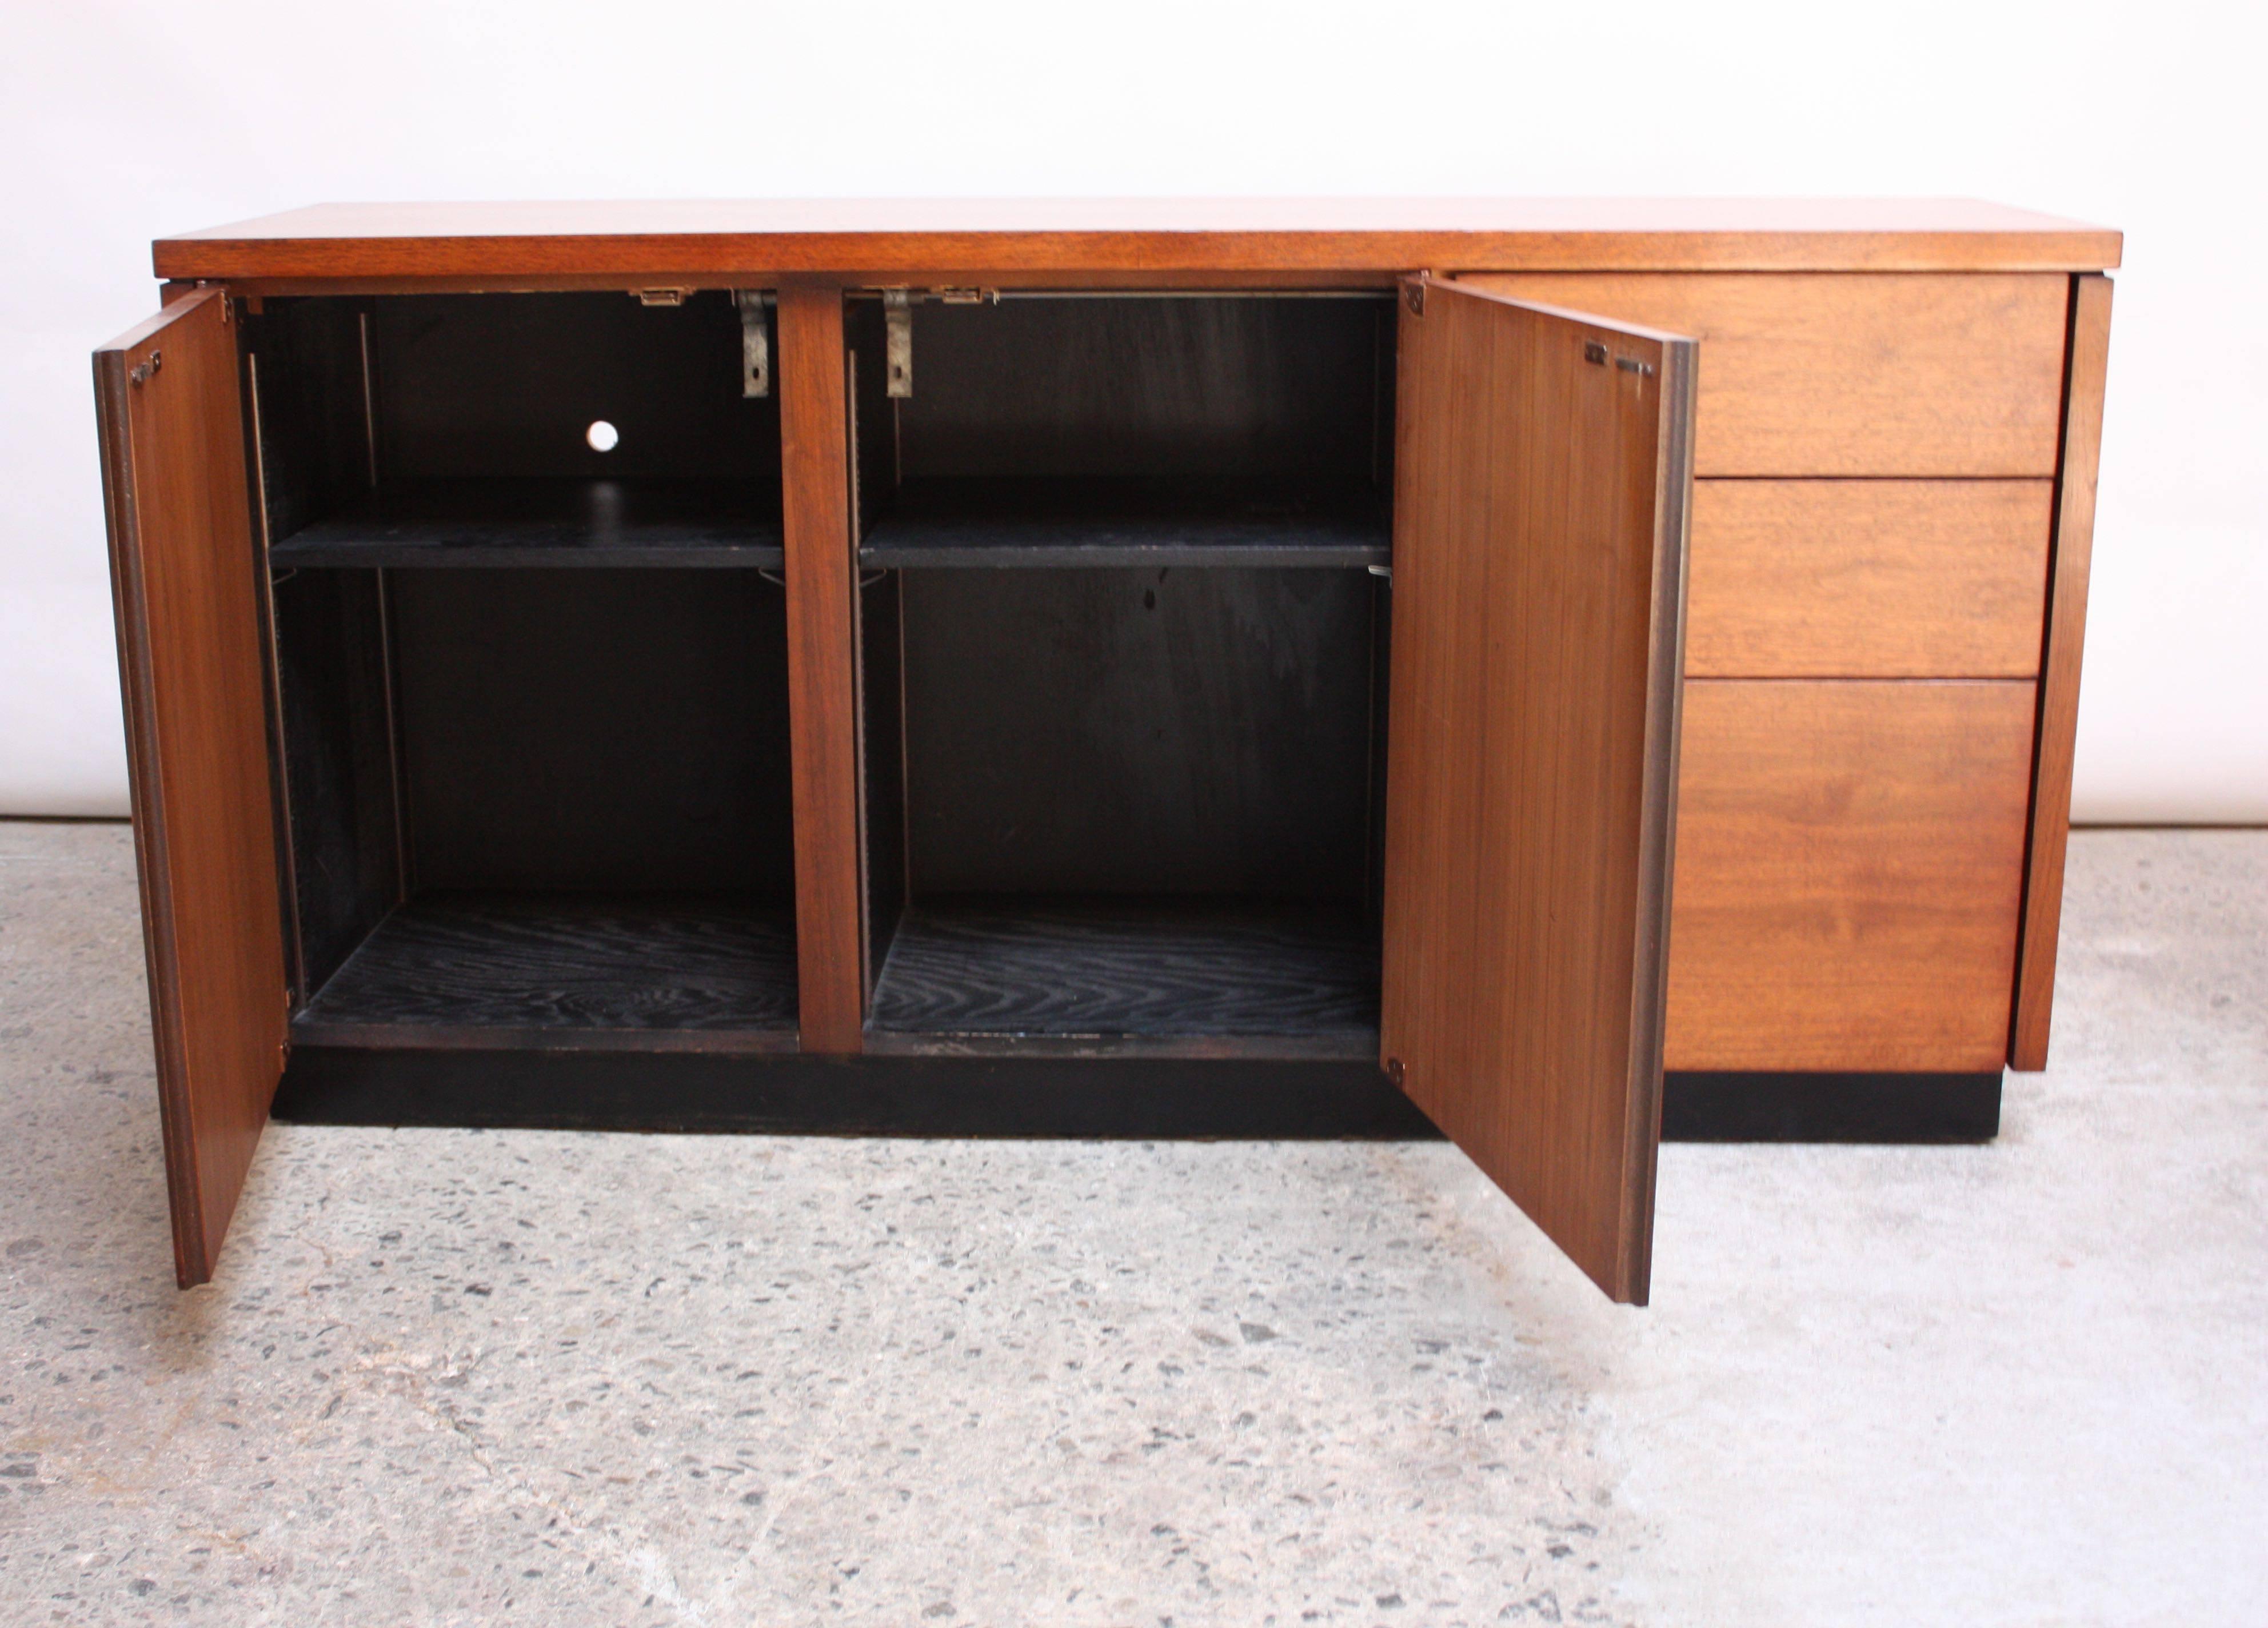 This walnut cabinet was manufactured by Lehigh Leopold in the 1970s and is comprised of two doors which open to reveal removable / adjustable shelves (a total of two). There are three drawers to the right for additional storage. The ebonized oak